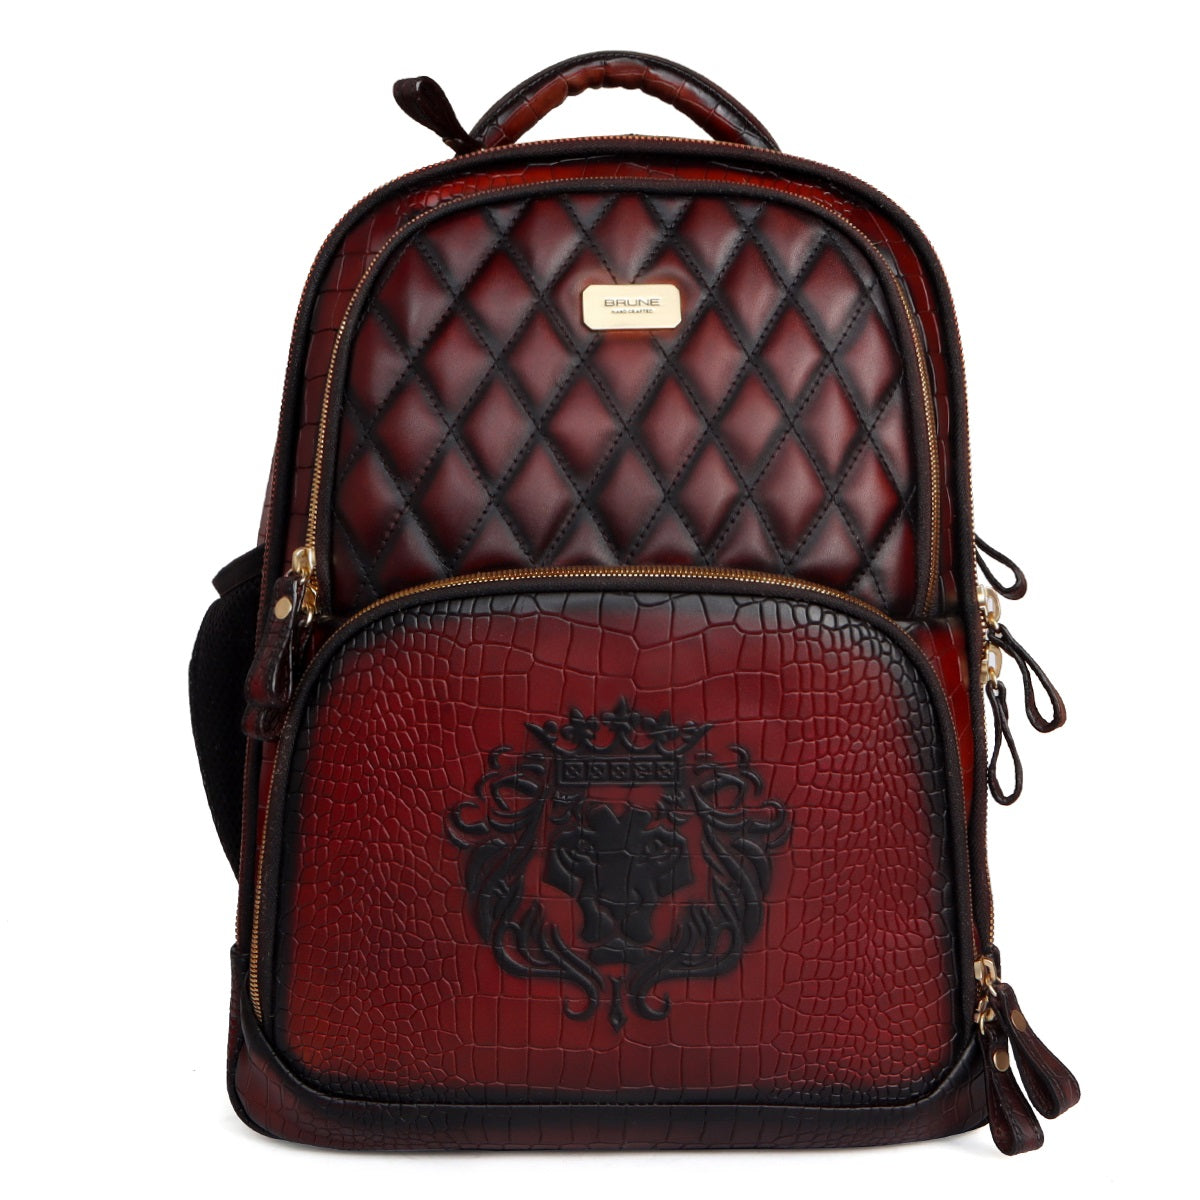 Suitcase Opening Travel Backpack Wine Embossed Lion Croco Leather Diamond Stitched by Brune & Bareskin